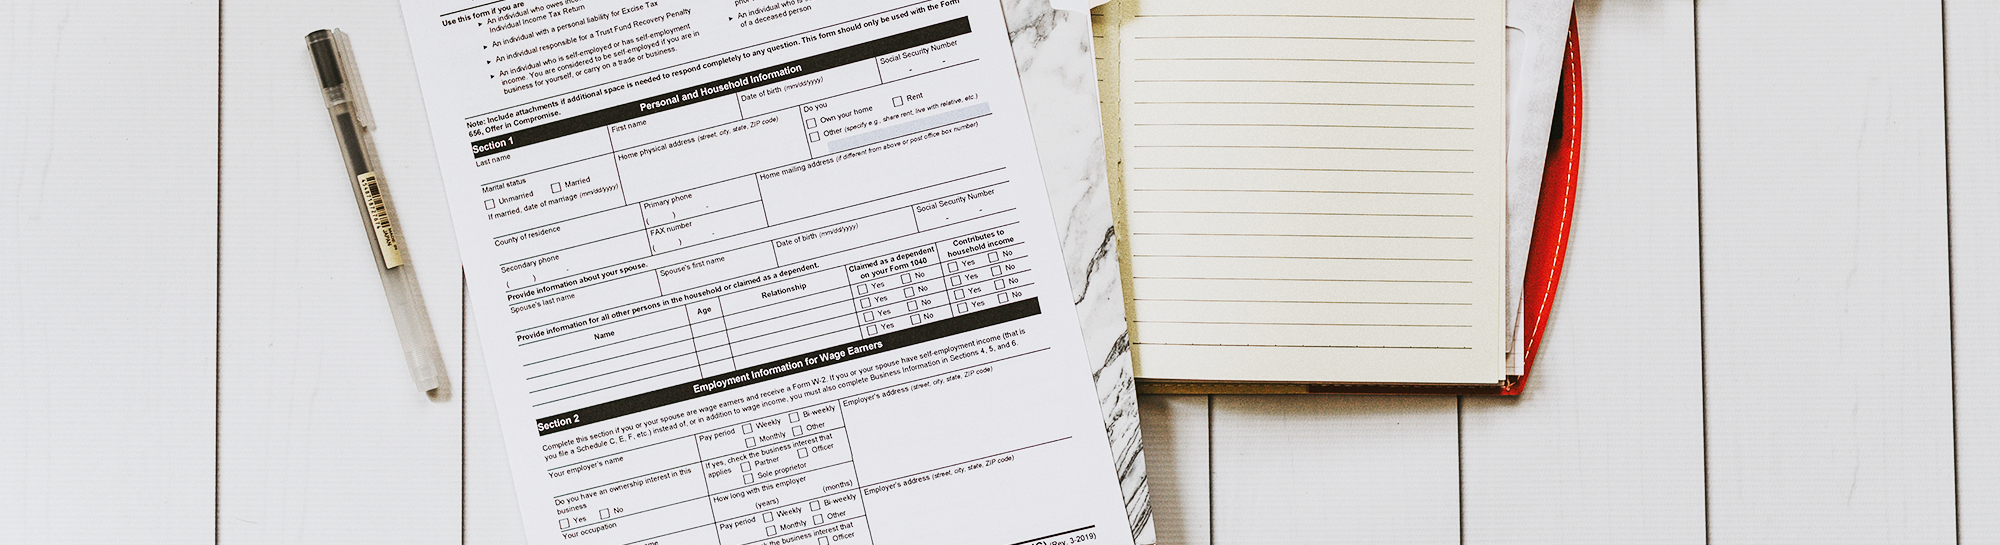 Commercial Invoice: What is it and how to create one?